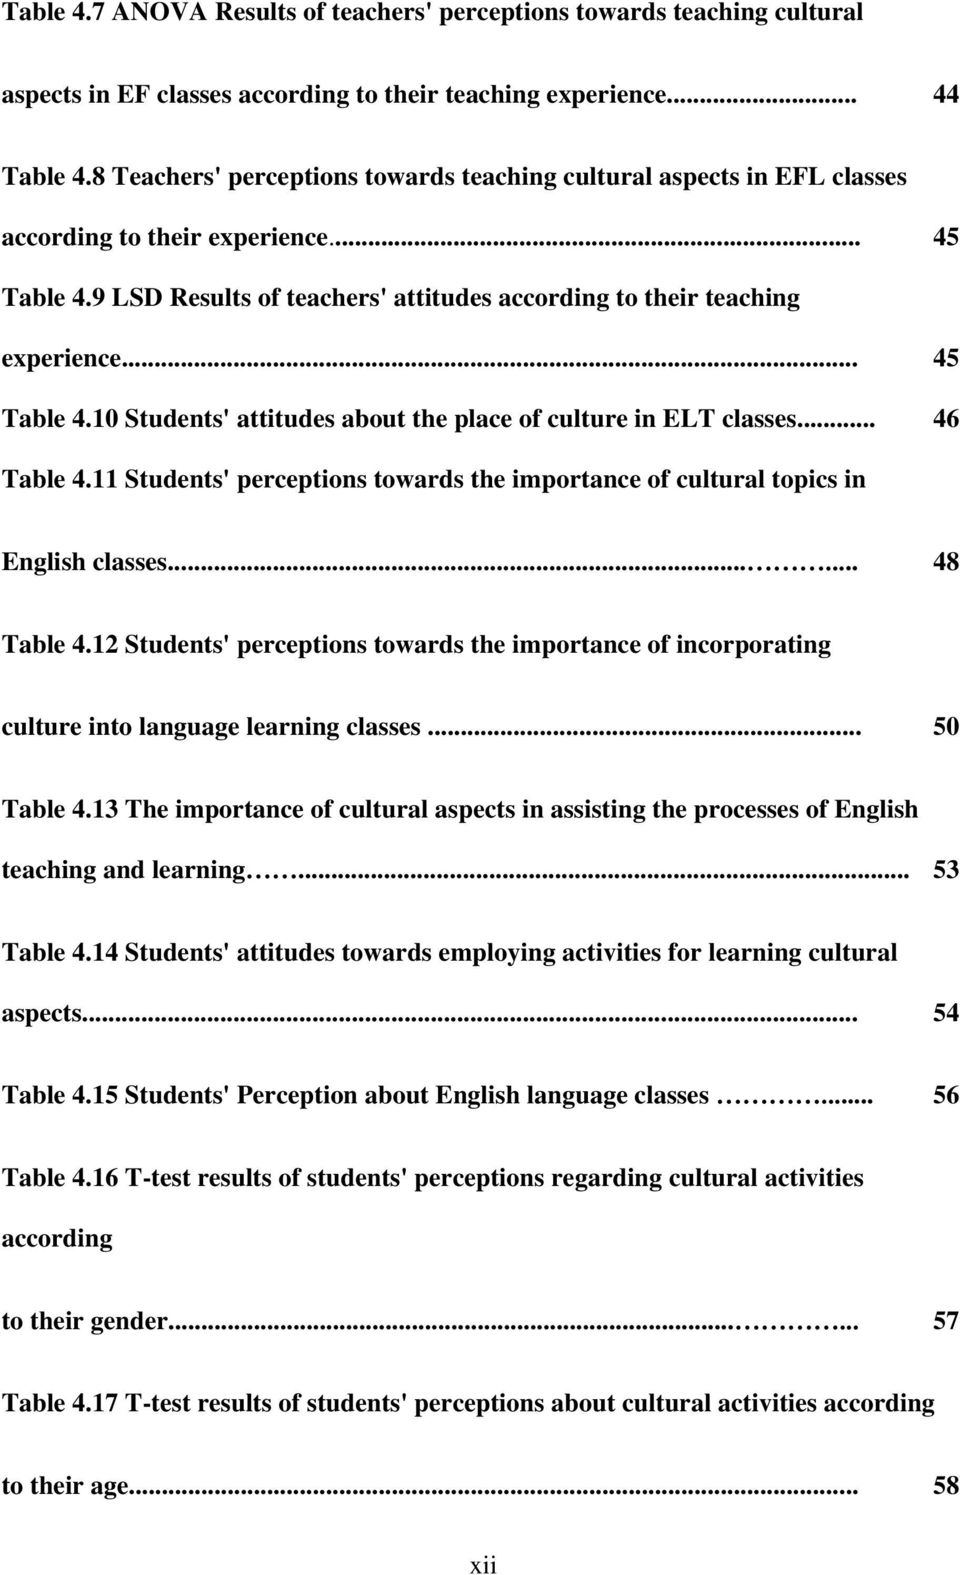 .. 45 Table 4.10 Students' attitudes about the place of culture in ELT classes... 46 Table 4.11 Students' perceptions towards the importance of cultural topics in English classes...... 48 Table 4.